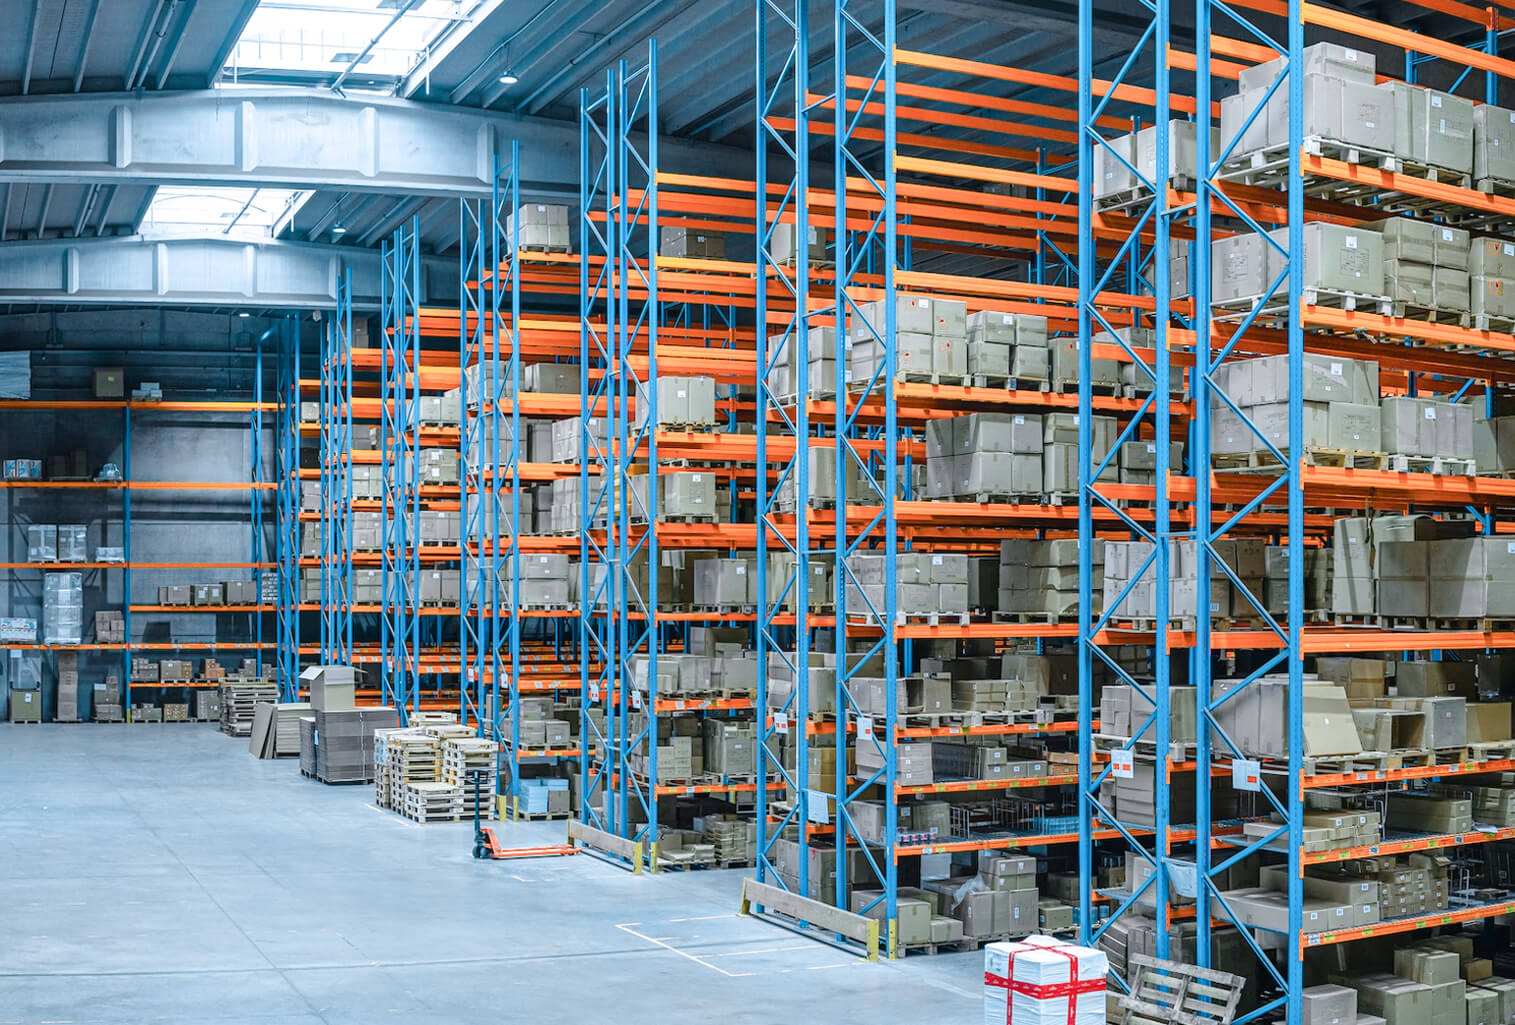 How can RTLS benefit logistics and warehouses?